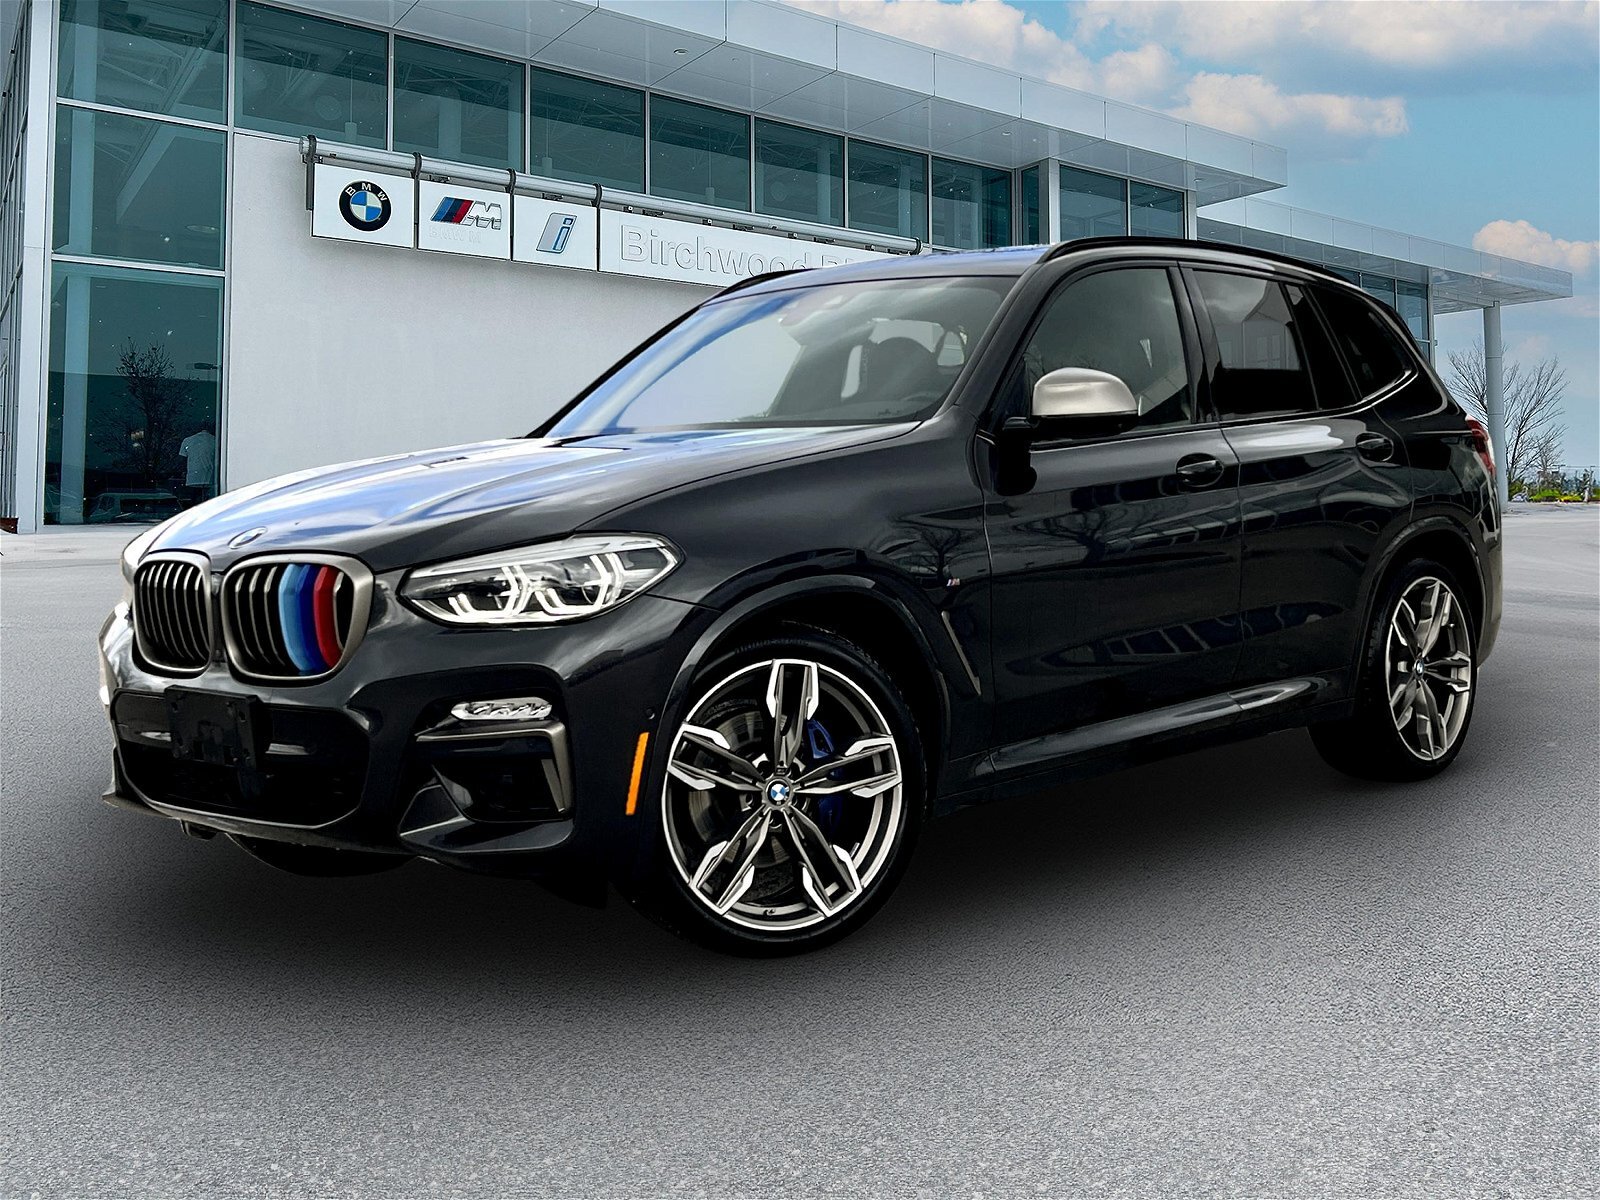 2018 BMW X3 M40i Sold and Pending Delivery!!